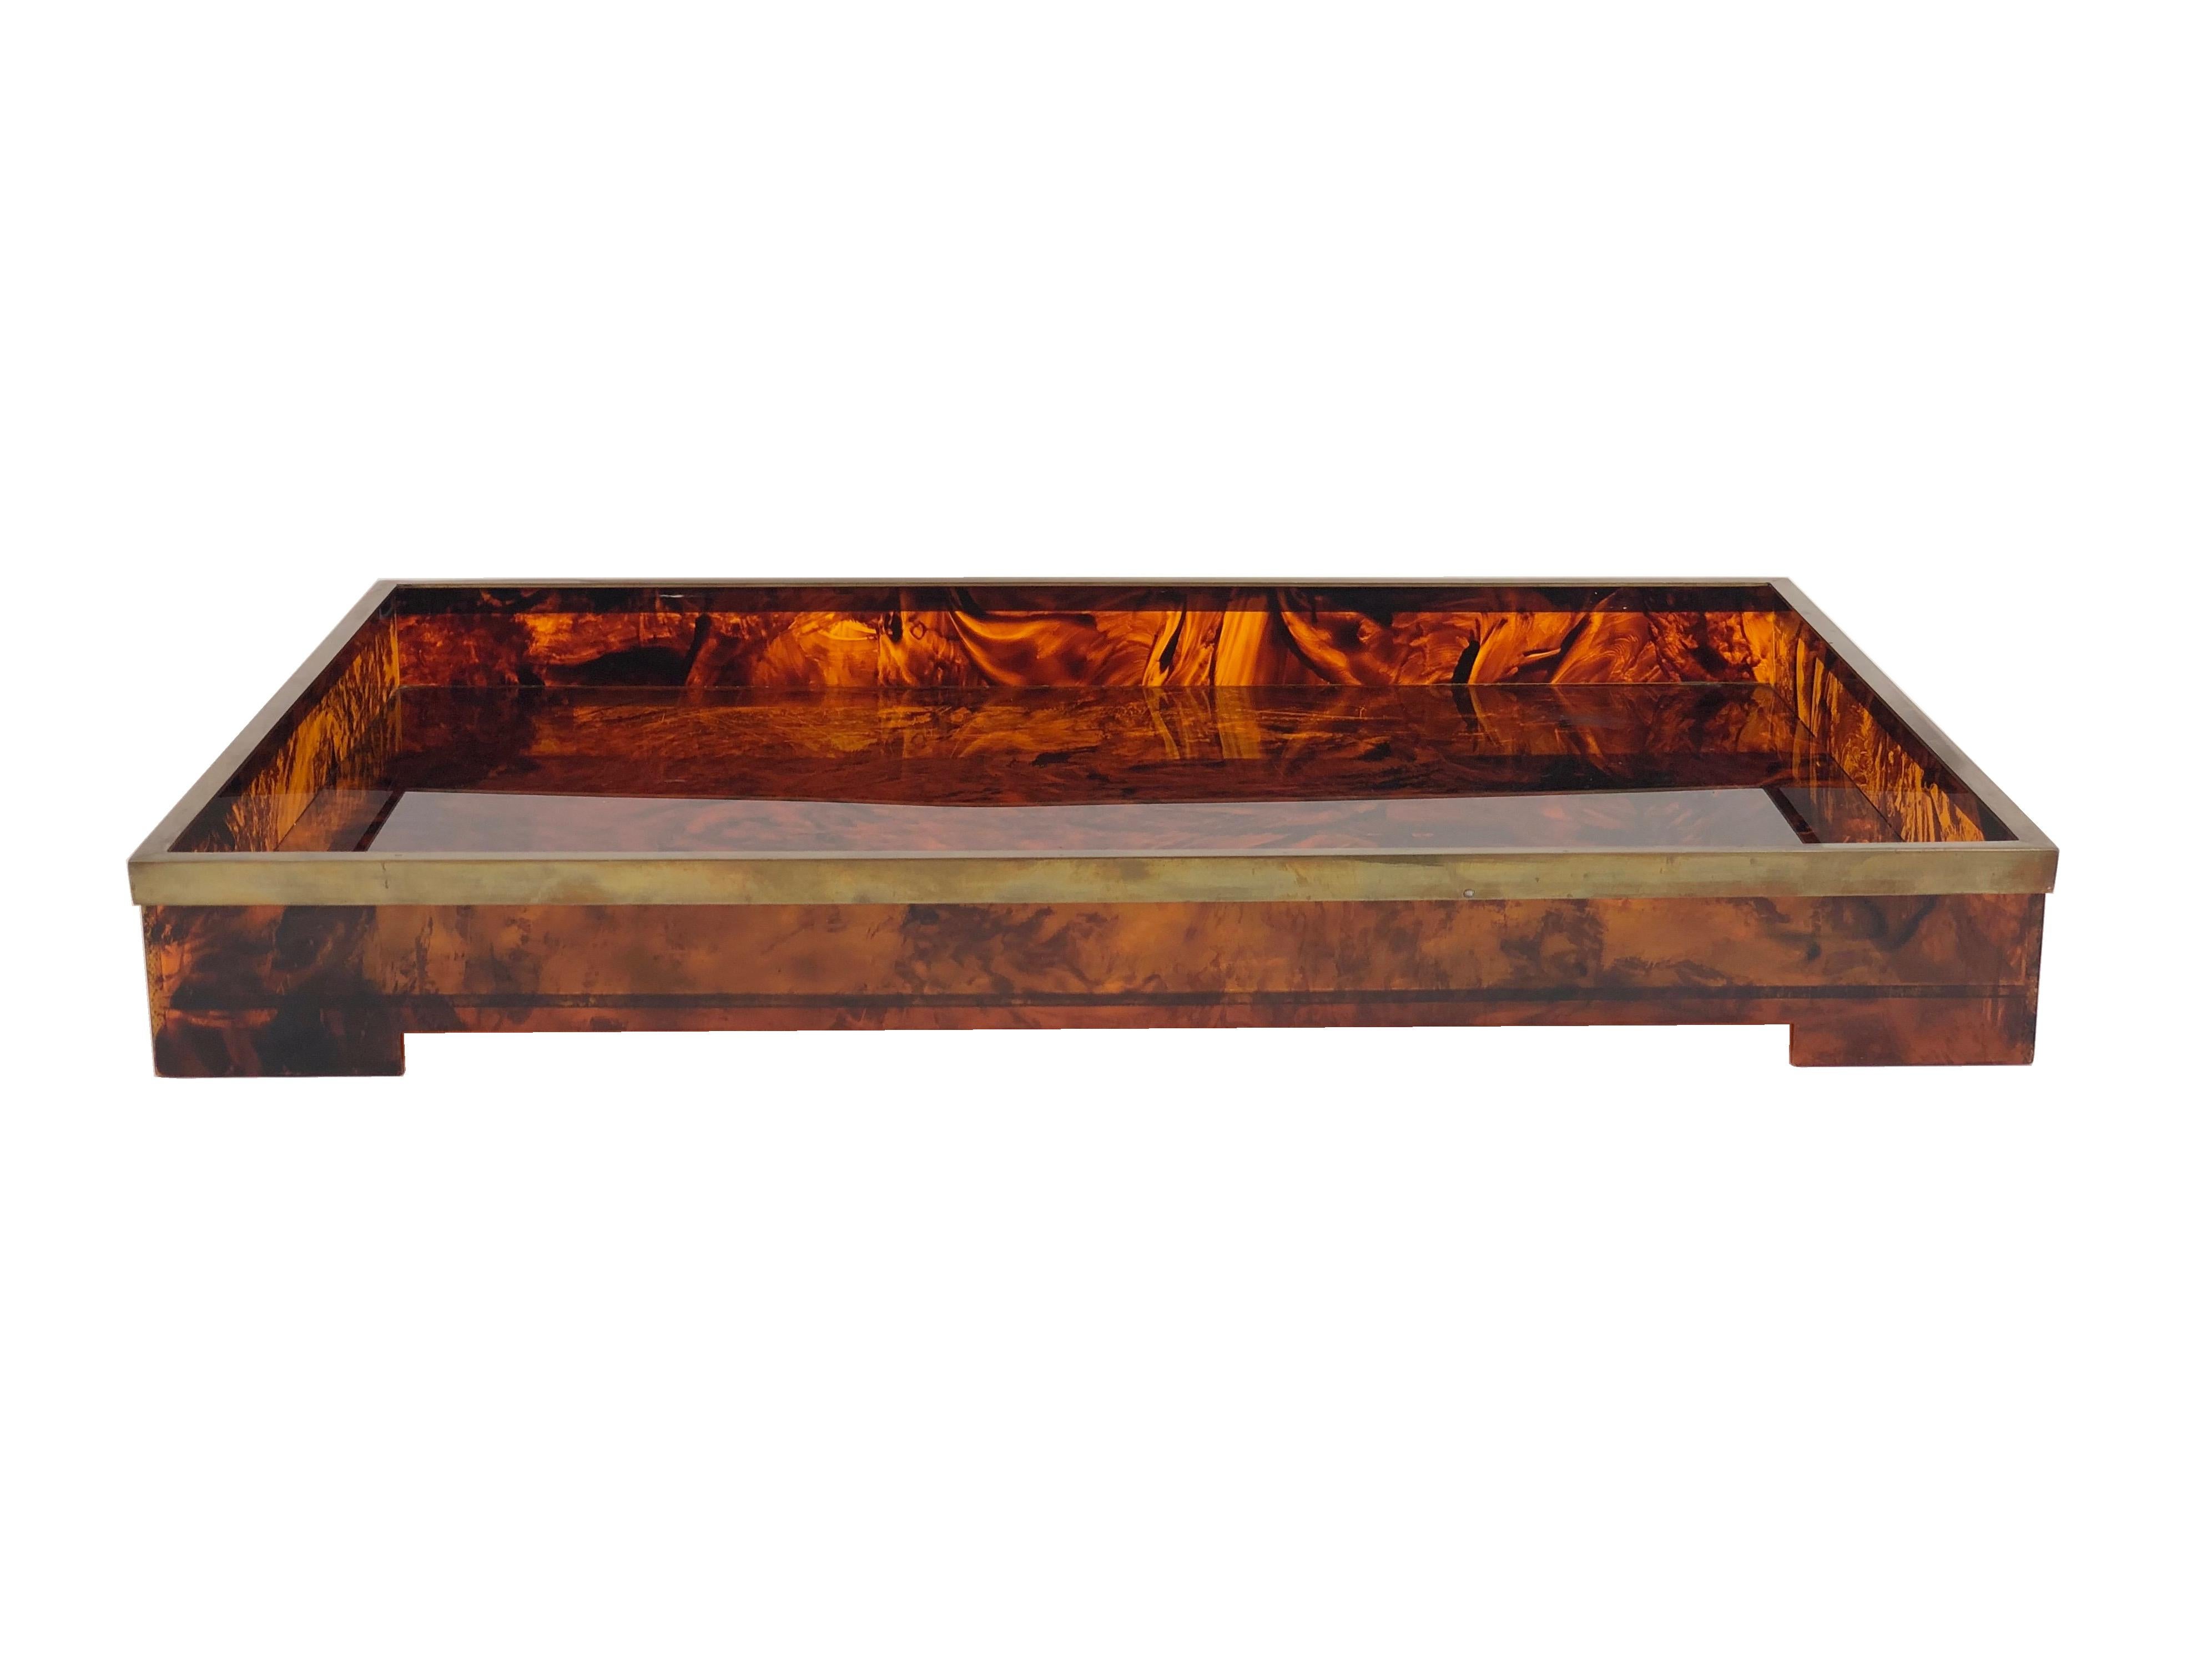 Tortoiseshell serving tray, Lucite and brass, Willy Rizzo style, Italy 1970s.